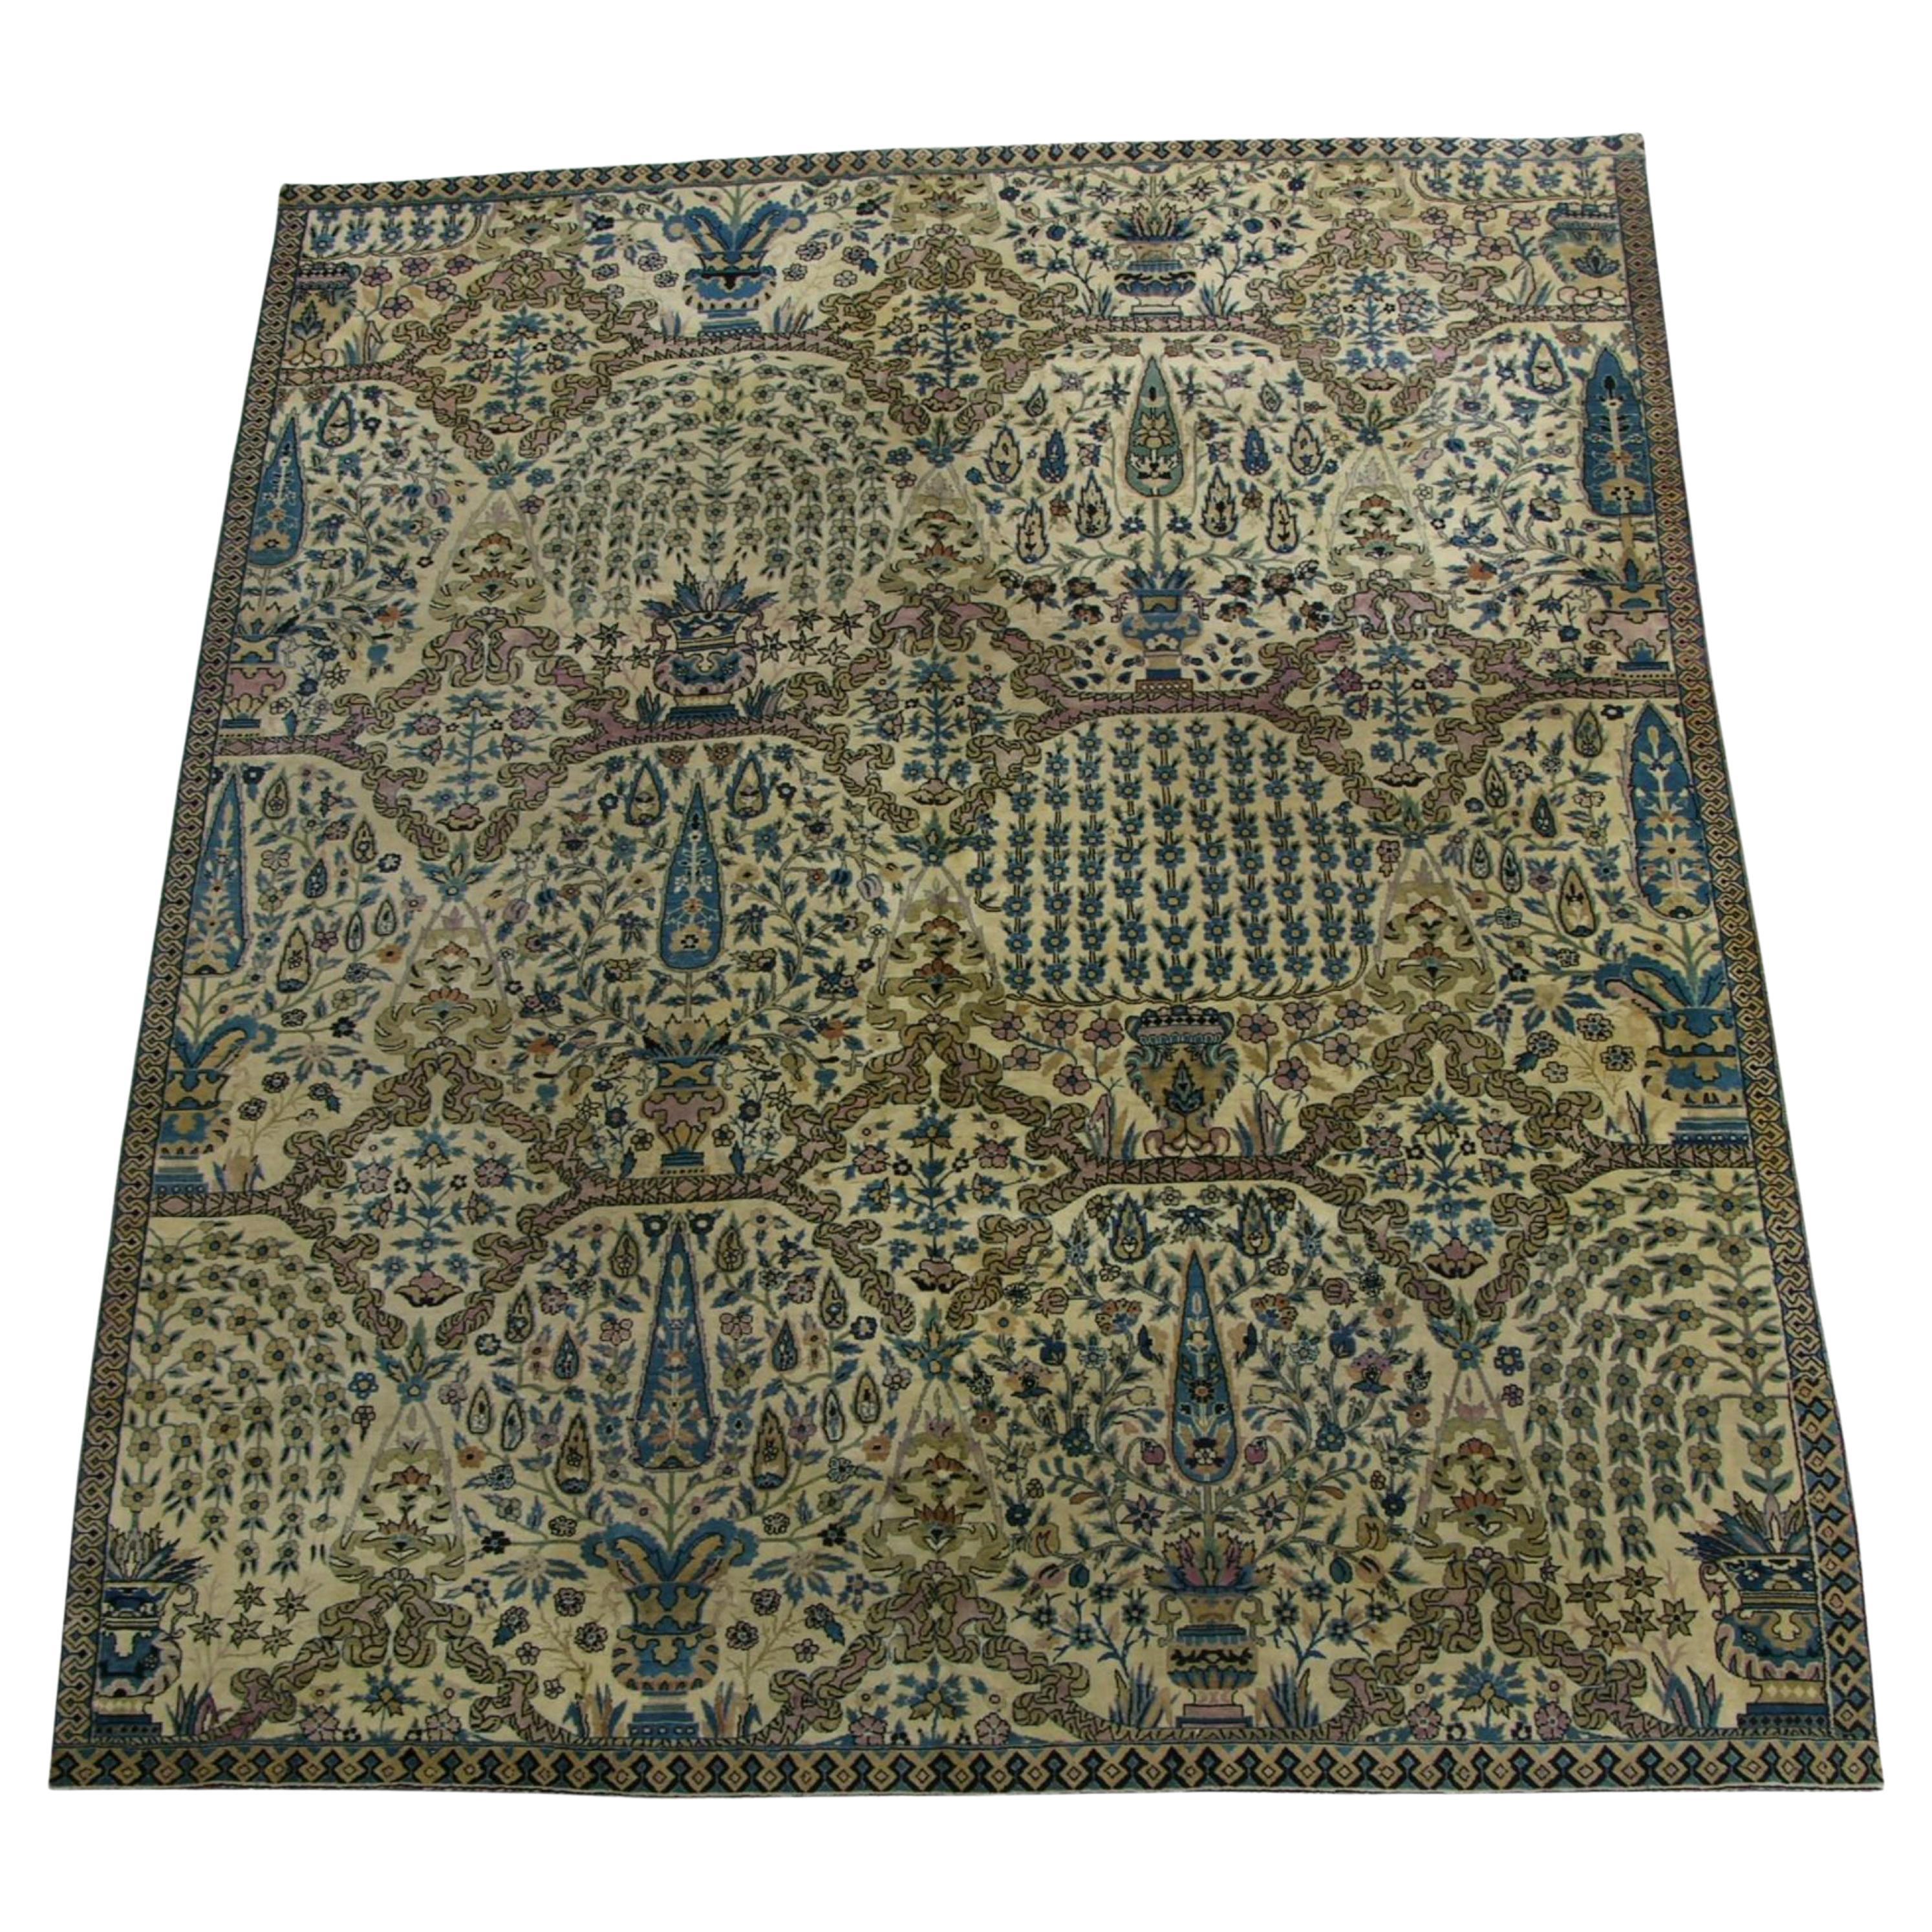 1920s Antique Indian Agra Rug For Sale